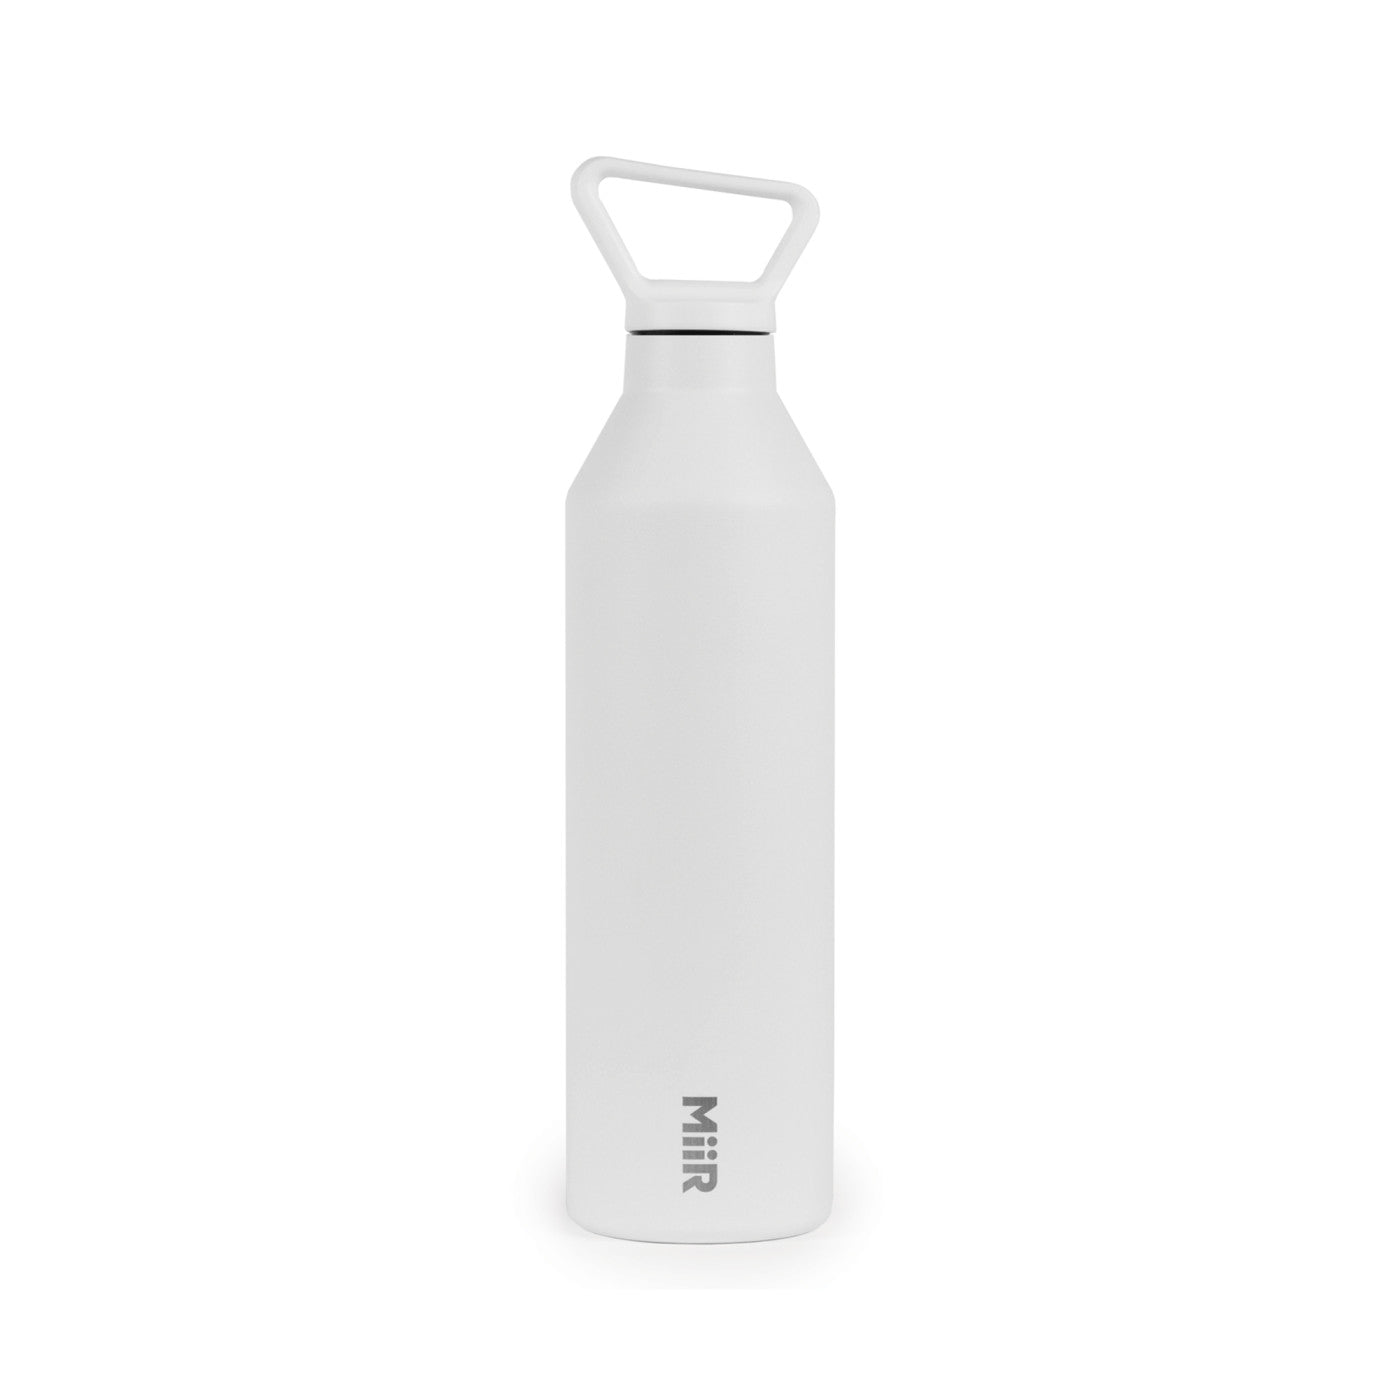 Customizable Miir 23 oz insulated water bottle in white.